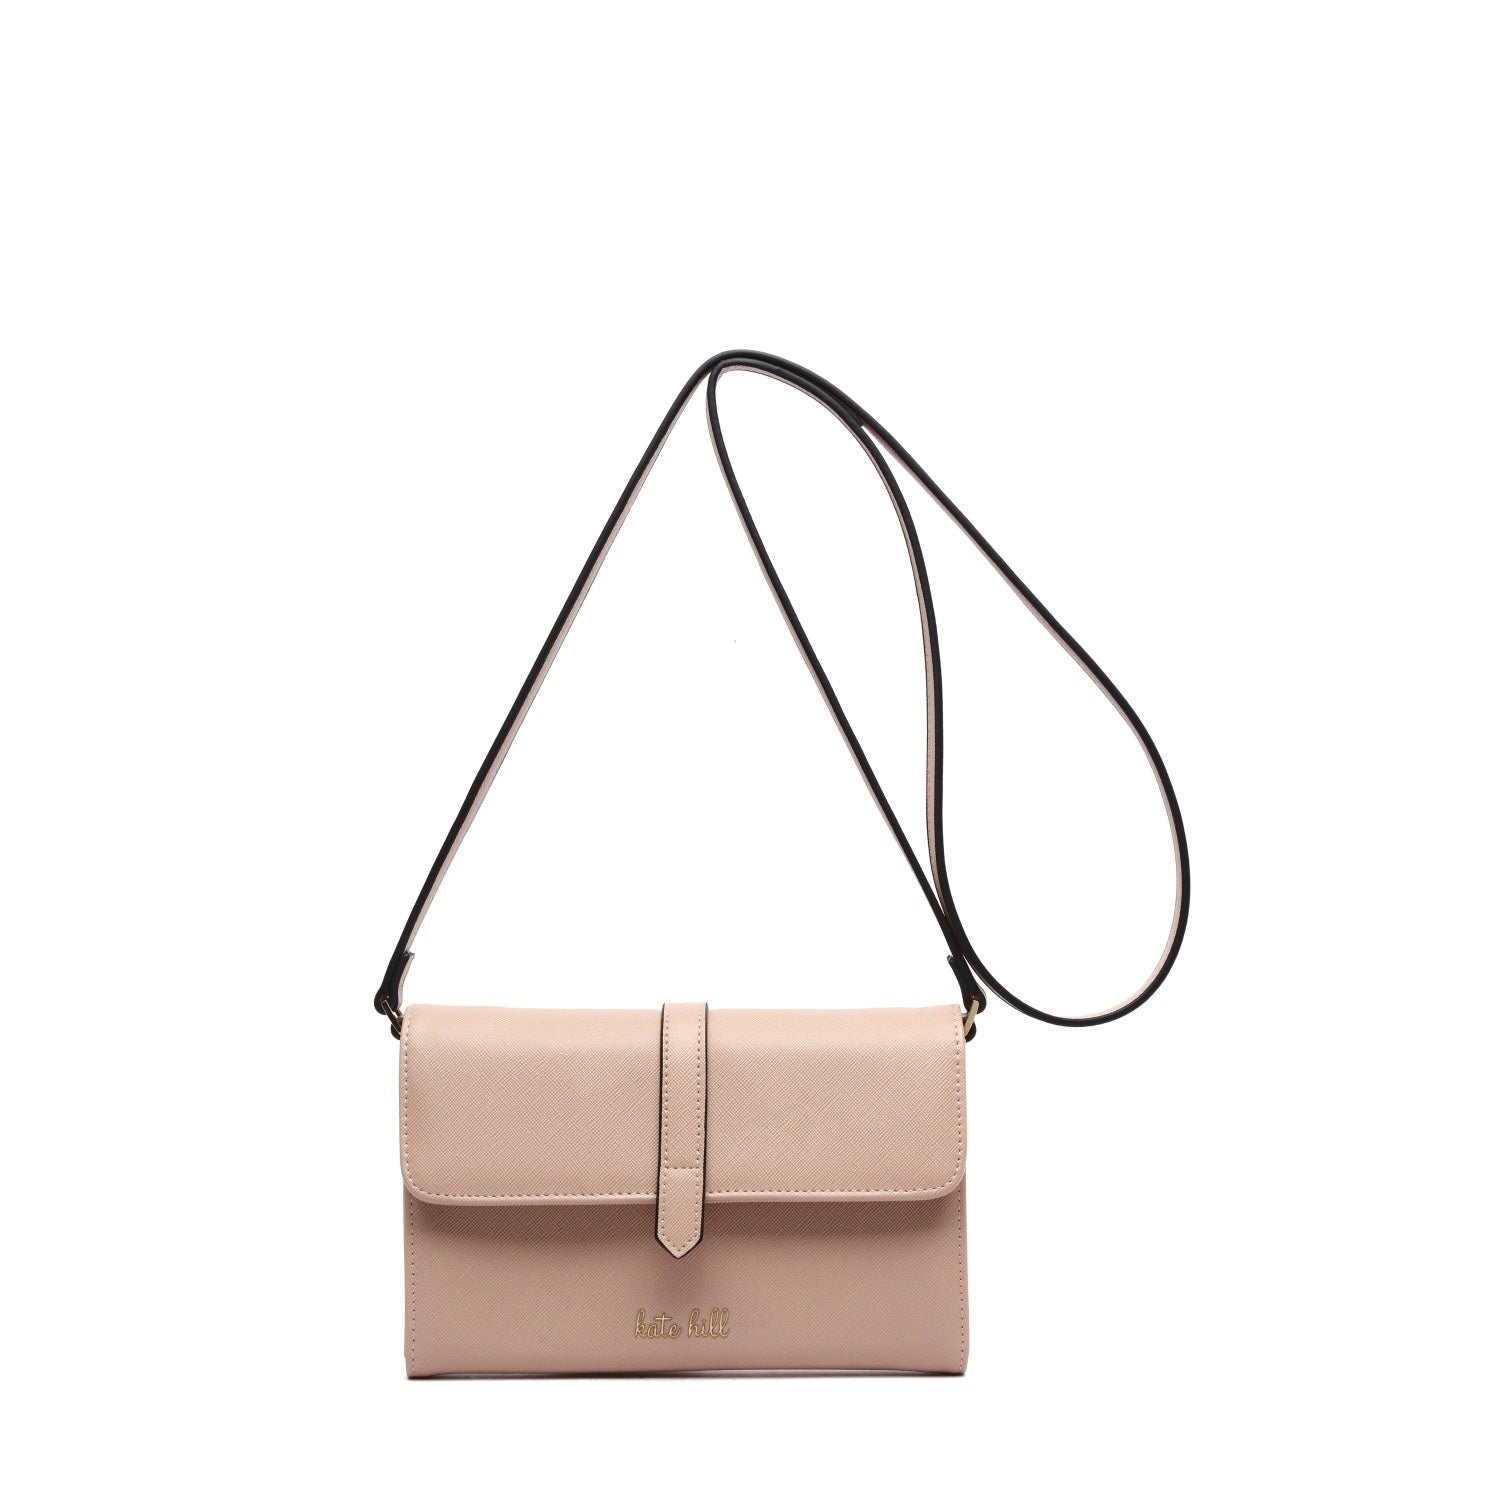 Kate Hill - Everly Crossbody KH-22003 - Nude-1